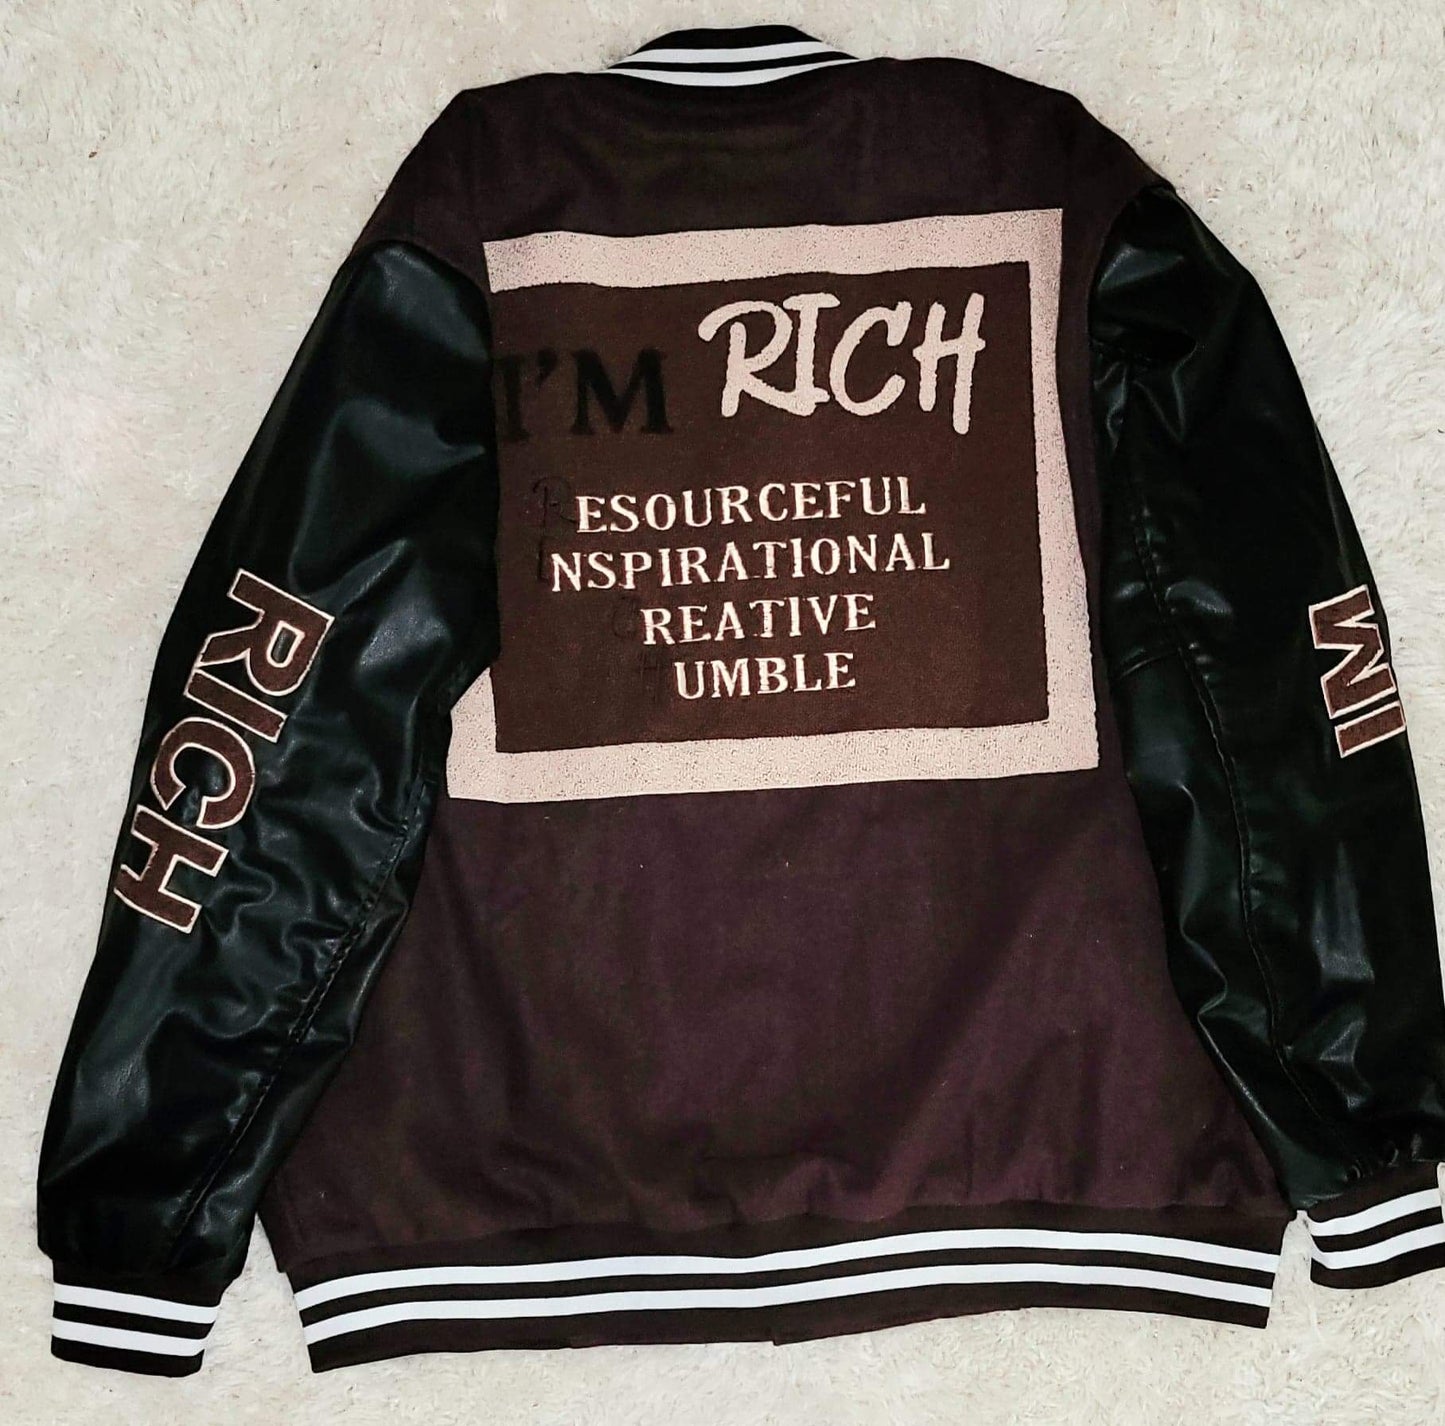 Im Rich Wool and Leather Varsity jacket